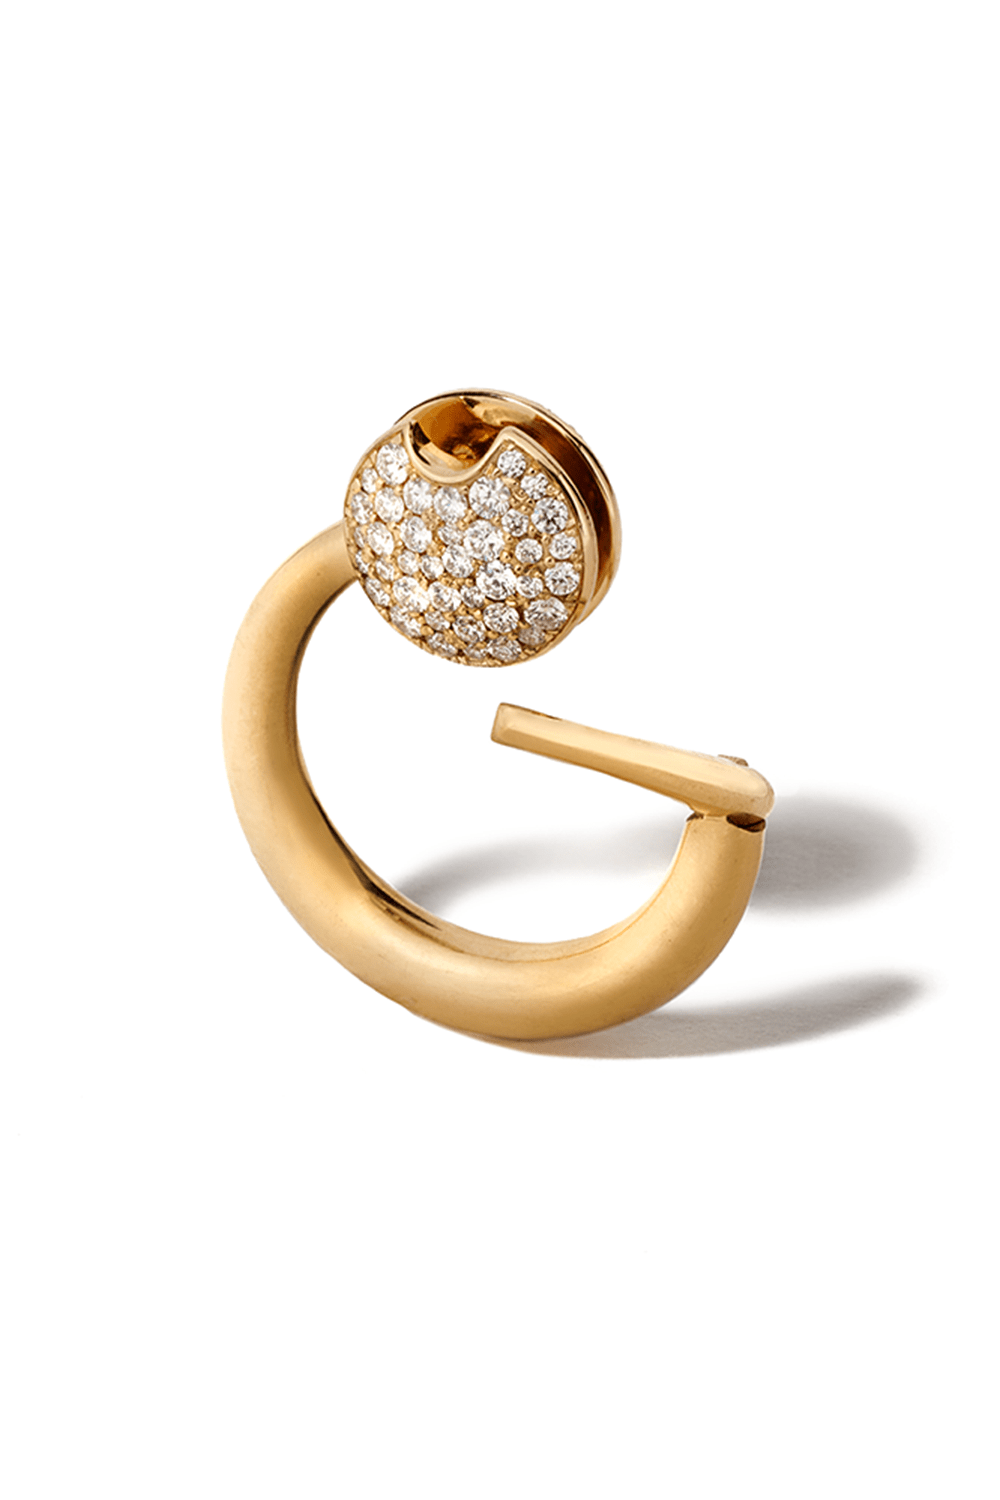 MARLA AARON-Stoned Musgrave Lock-YELLOW GOLD